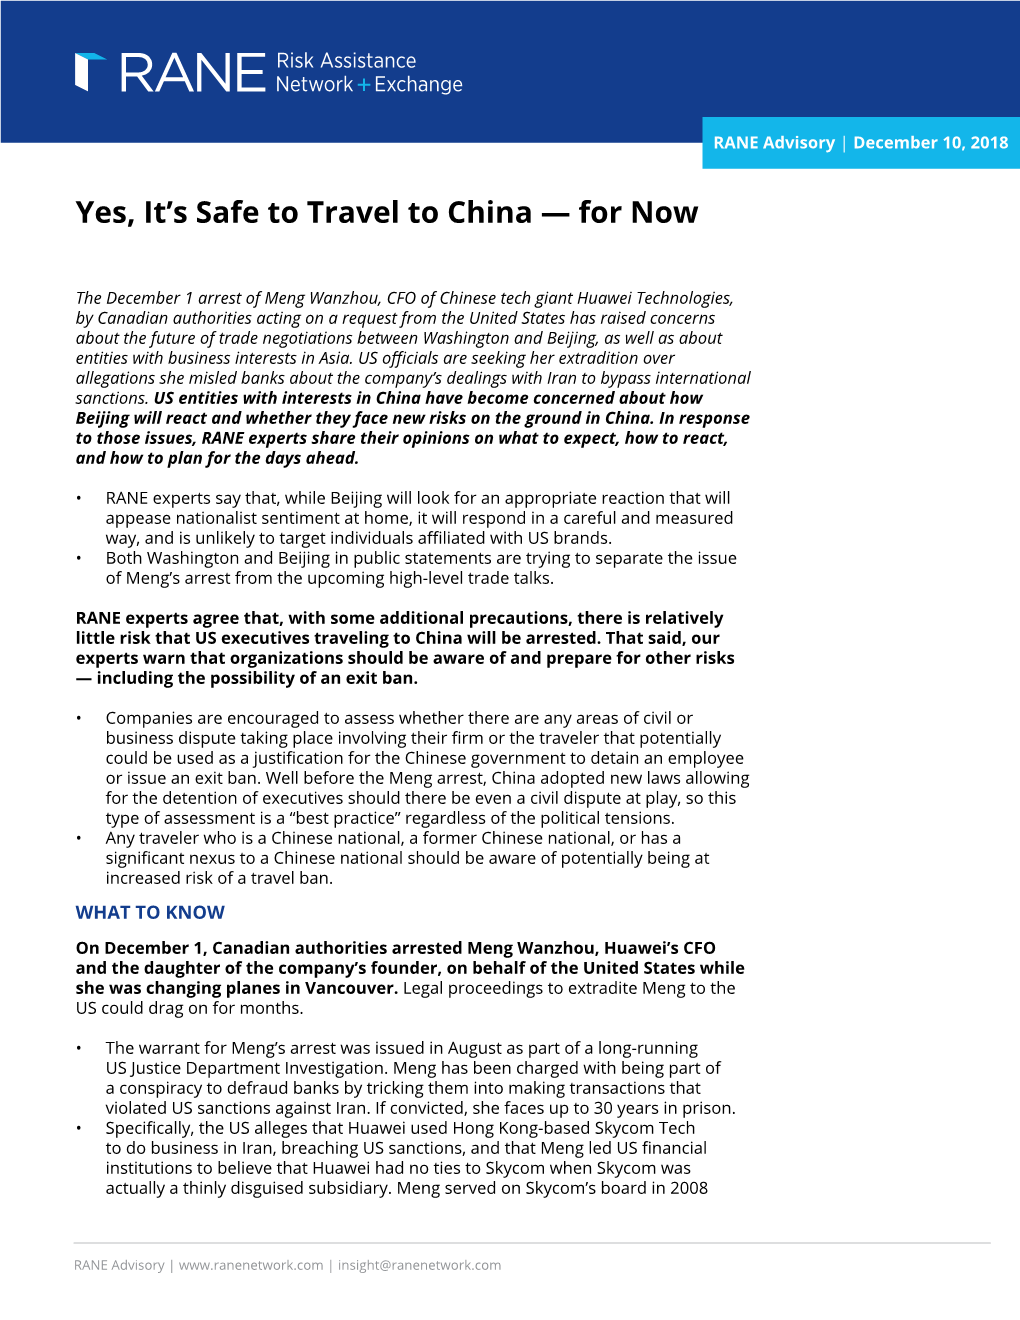 Yes, It's Safe to Travel to China — For